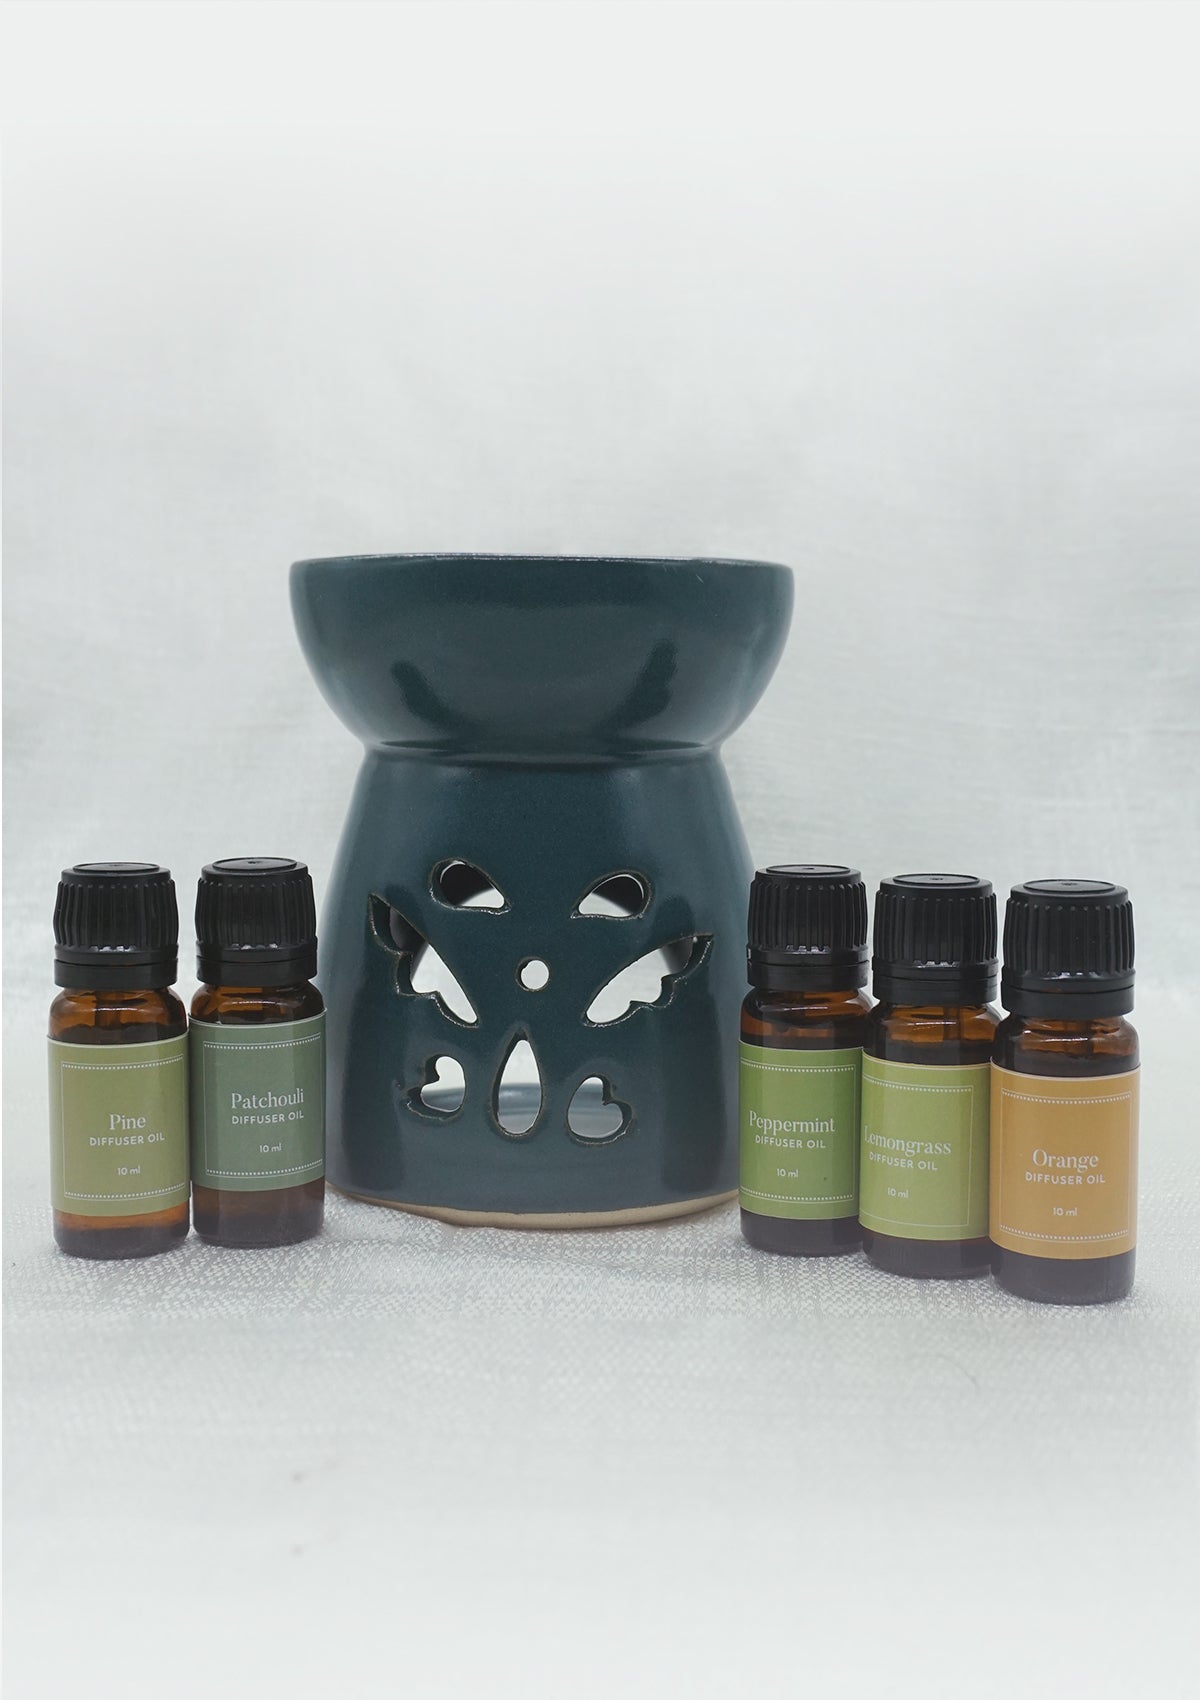 IshqME Blissful Aroma Set: Ceramic Diffuser & Essential Oils Collection - IshqMe